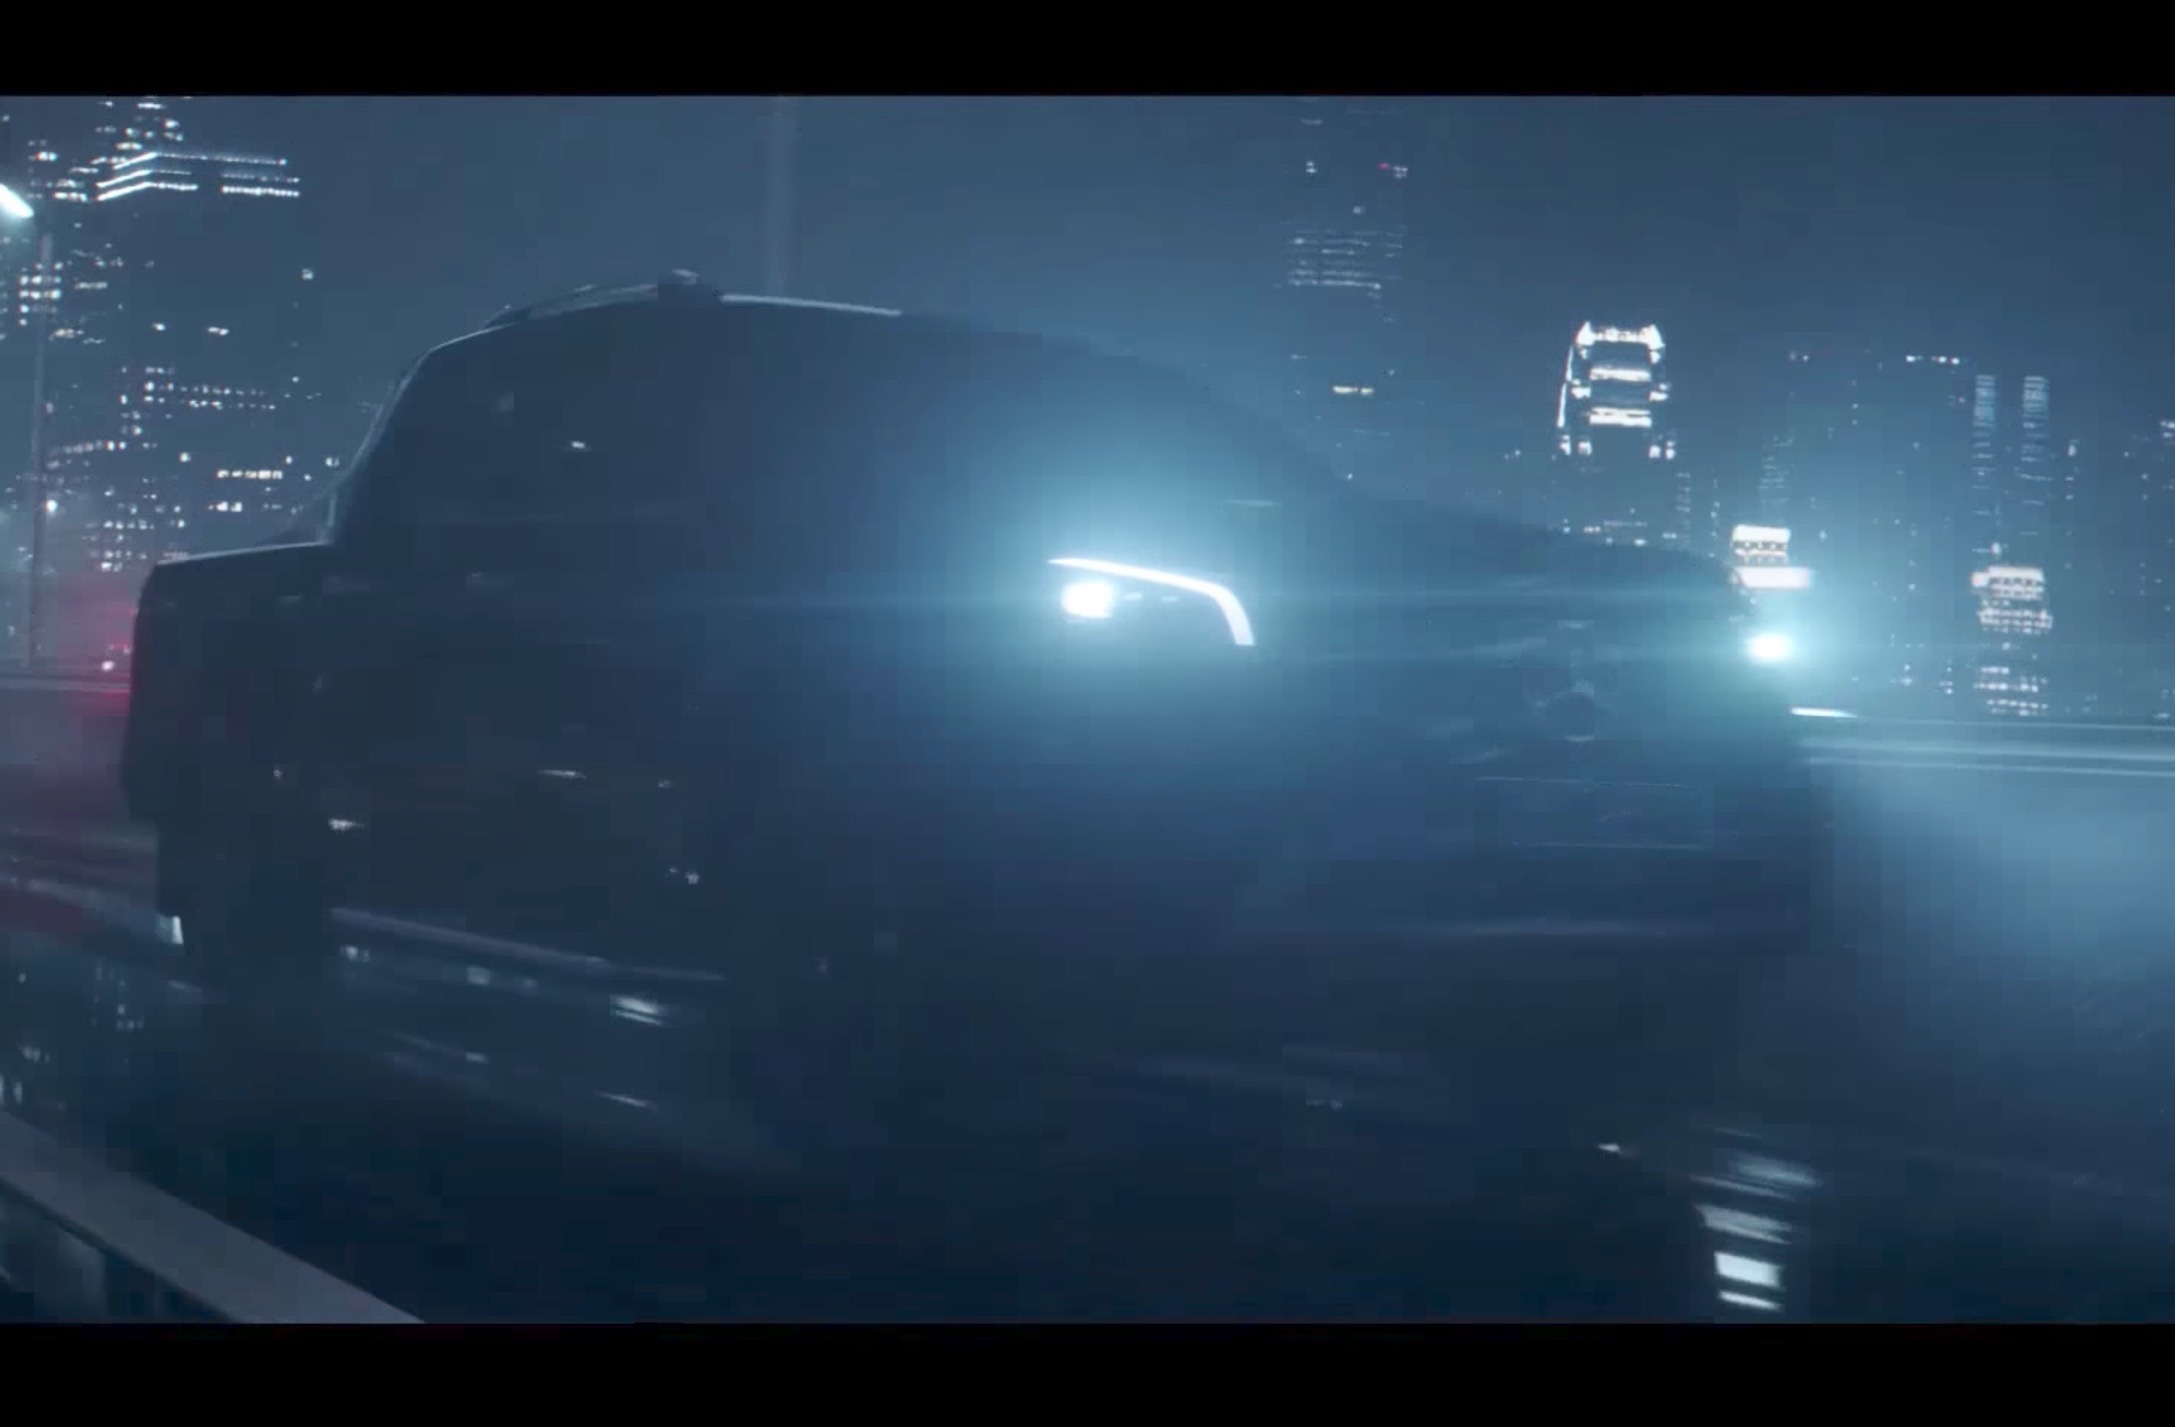 Mercedes-Benz X-Class ute previewed with first teaser (video)